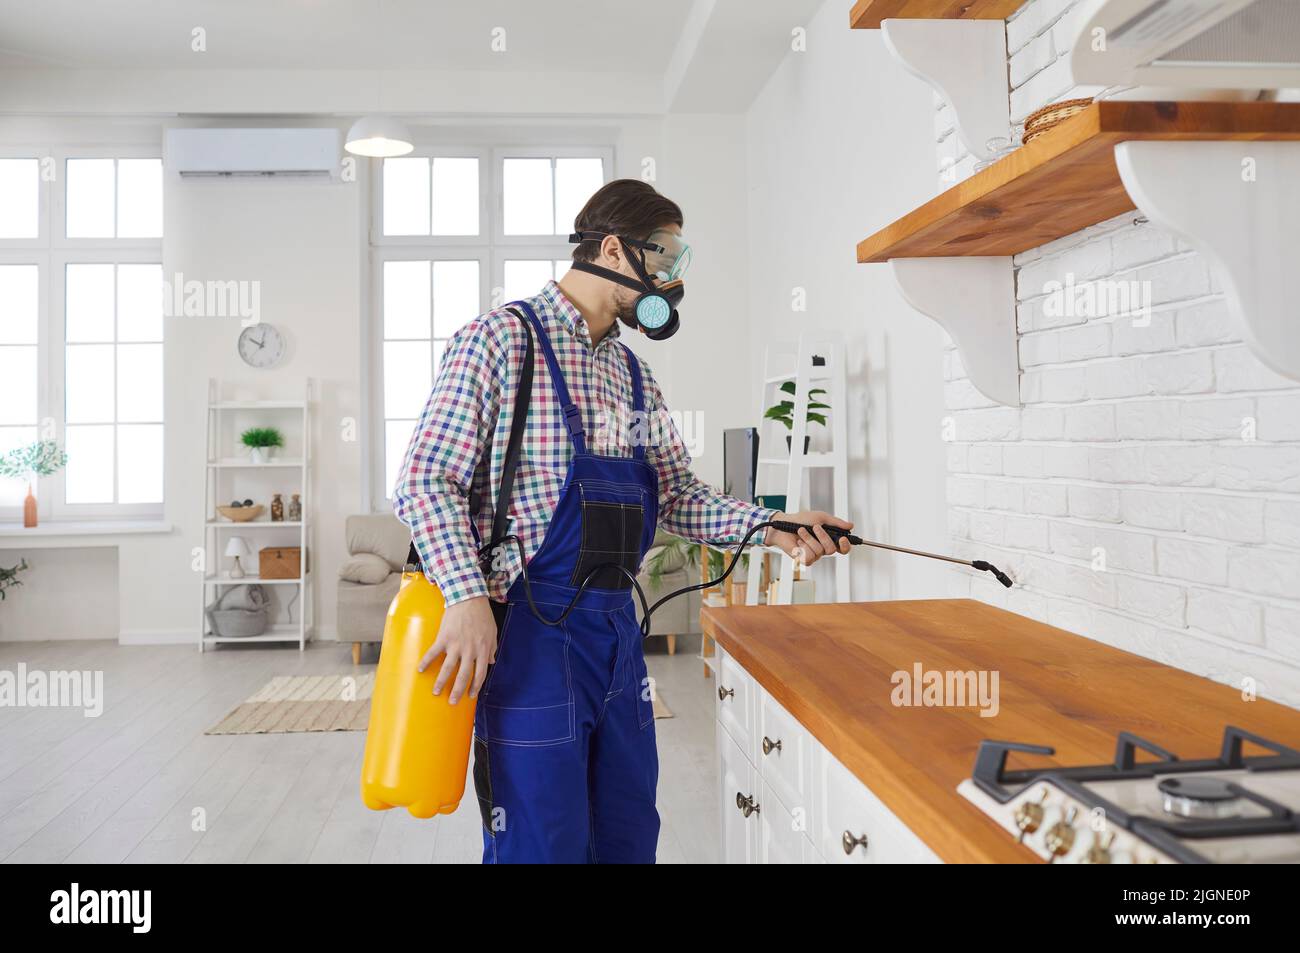 Worker from pest control service spraying insecticide inside a house or apartment Stock Photo